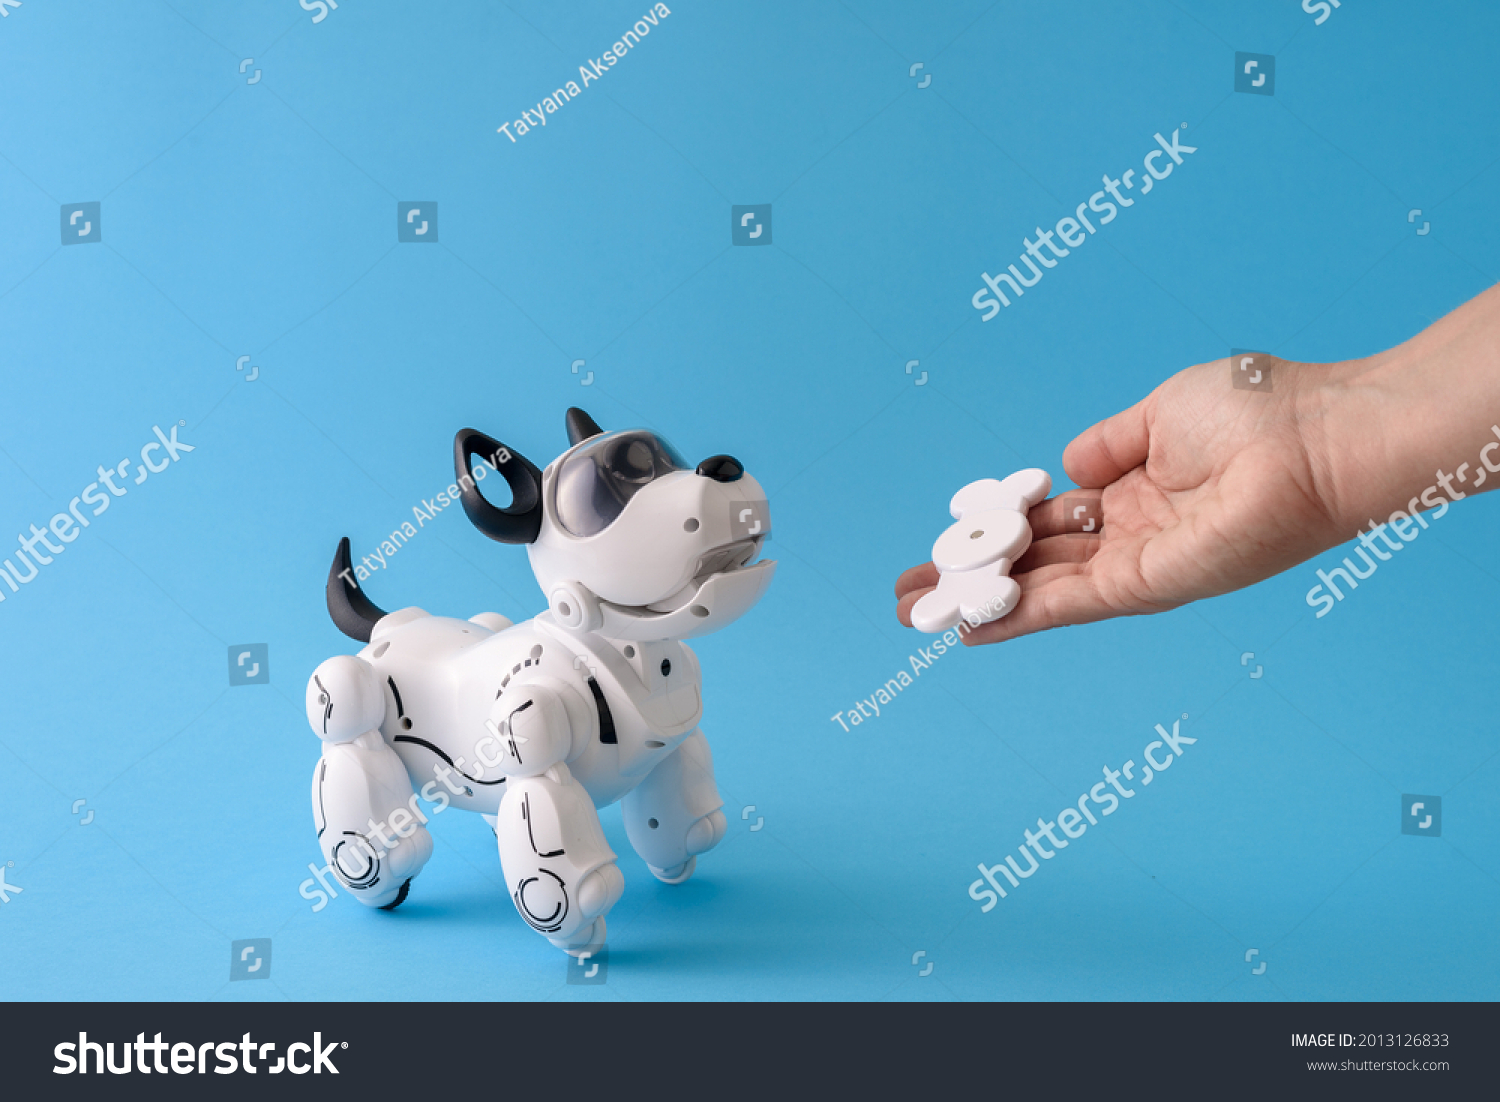 Robot dog pet on light blue background with human hand giving bone #2013126833